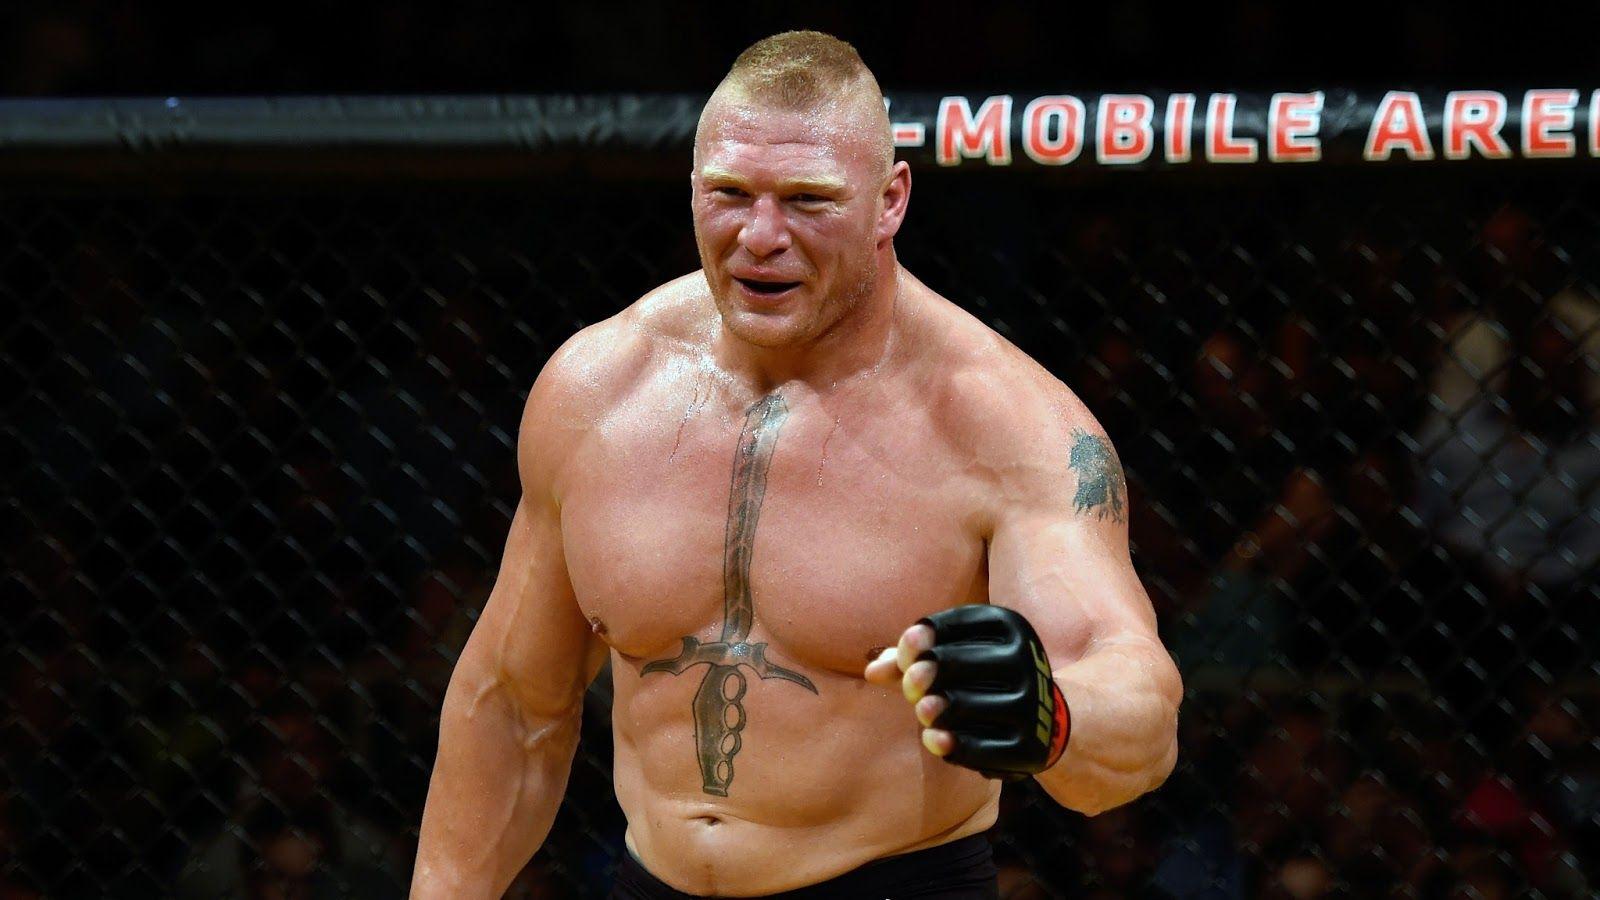 Latest WWE Brock Lesnar HD Wallpaper, Image And Photo